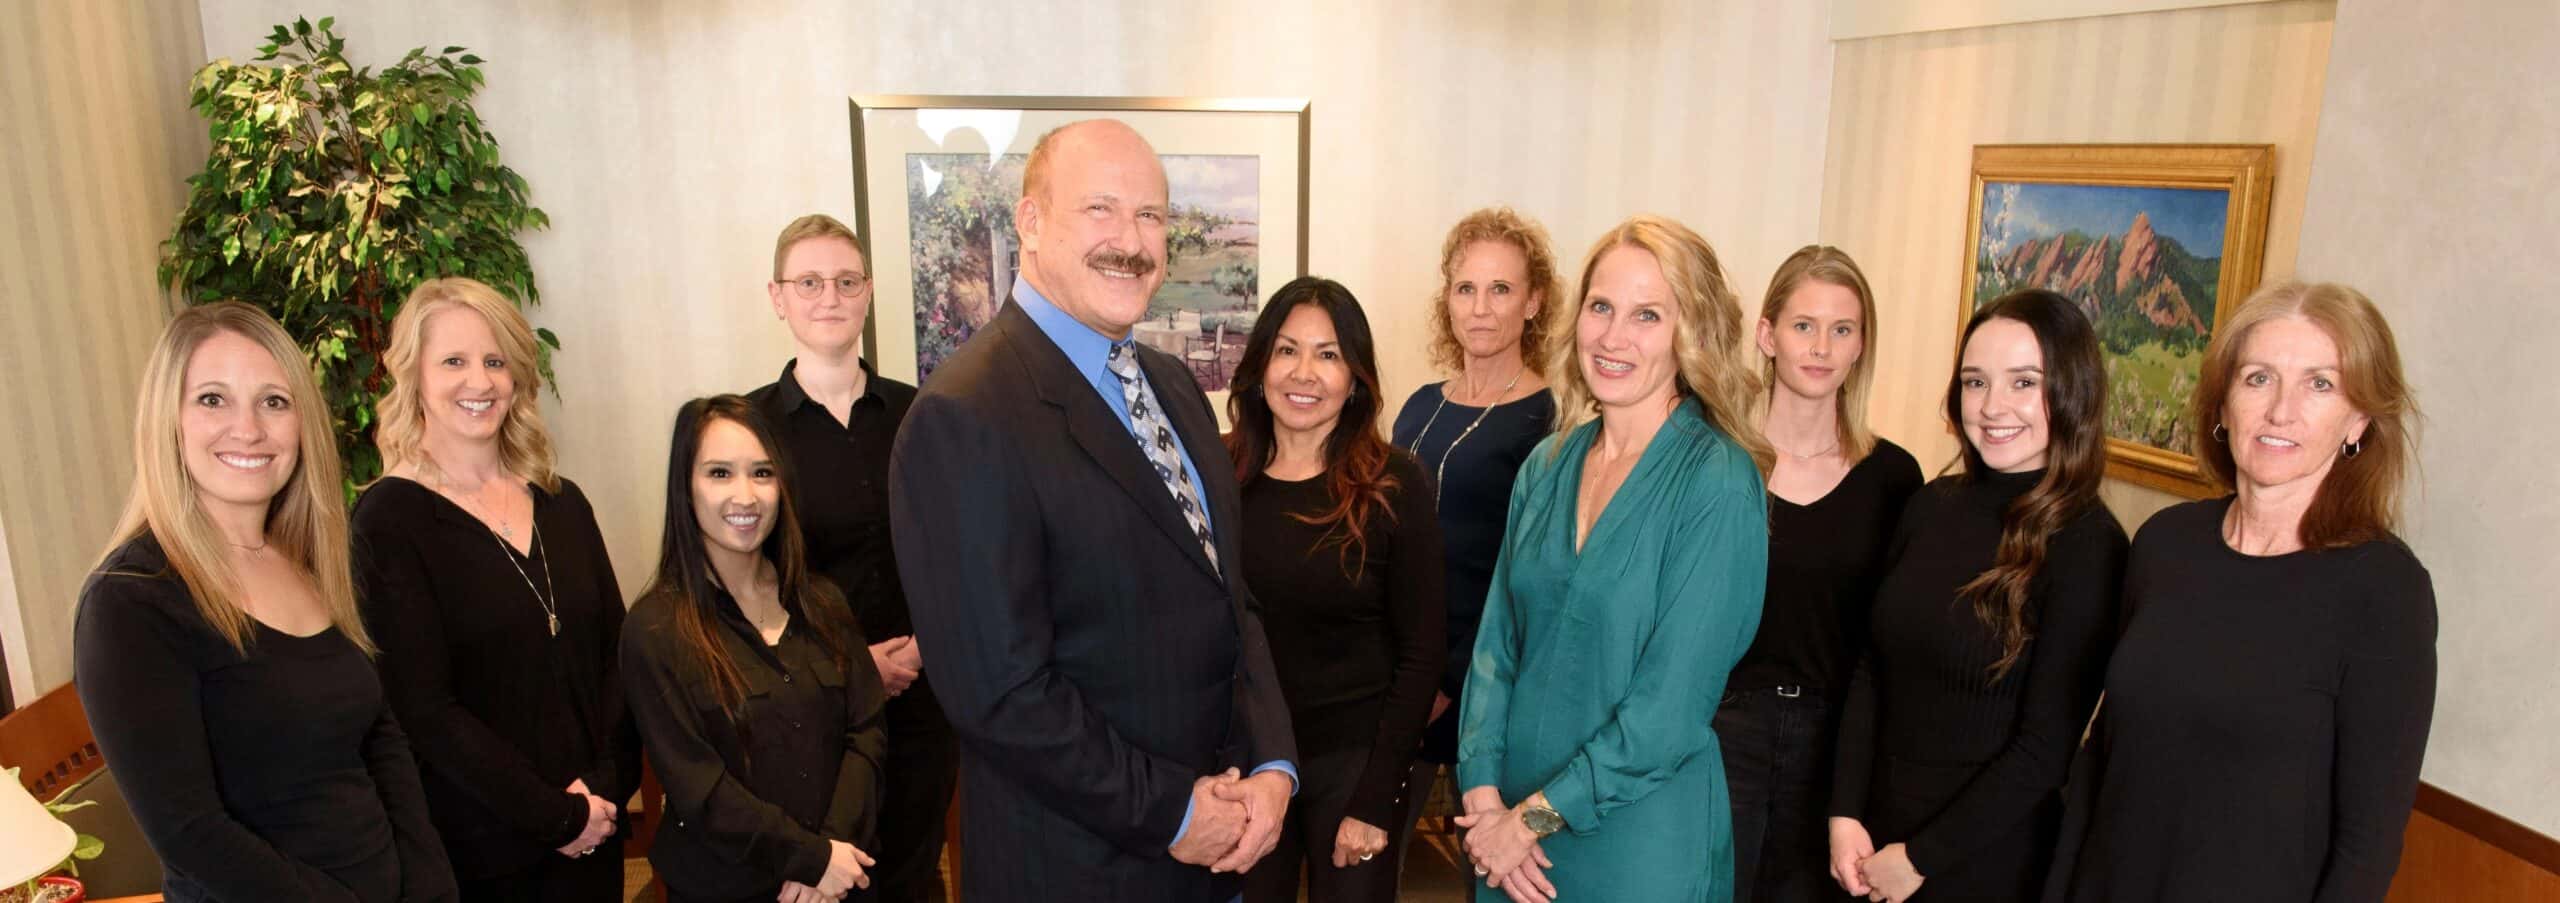 Team image of whole family dentistry staff